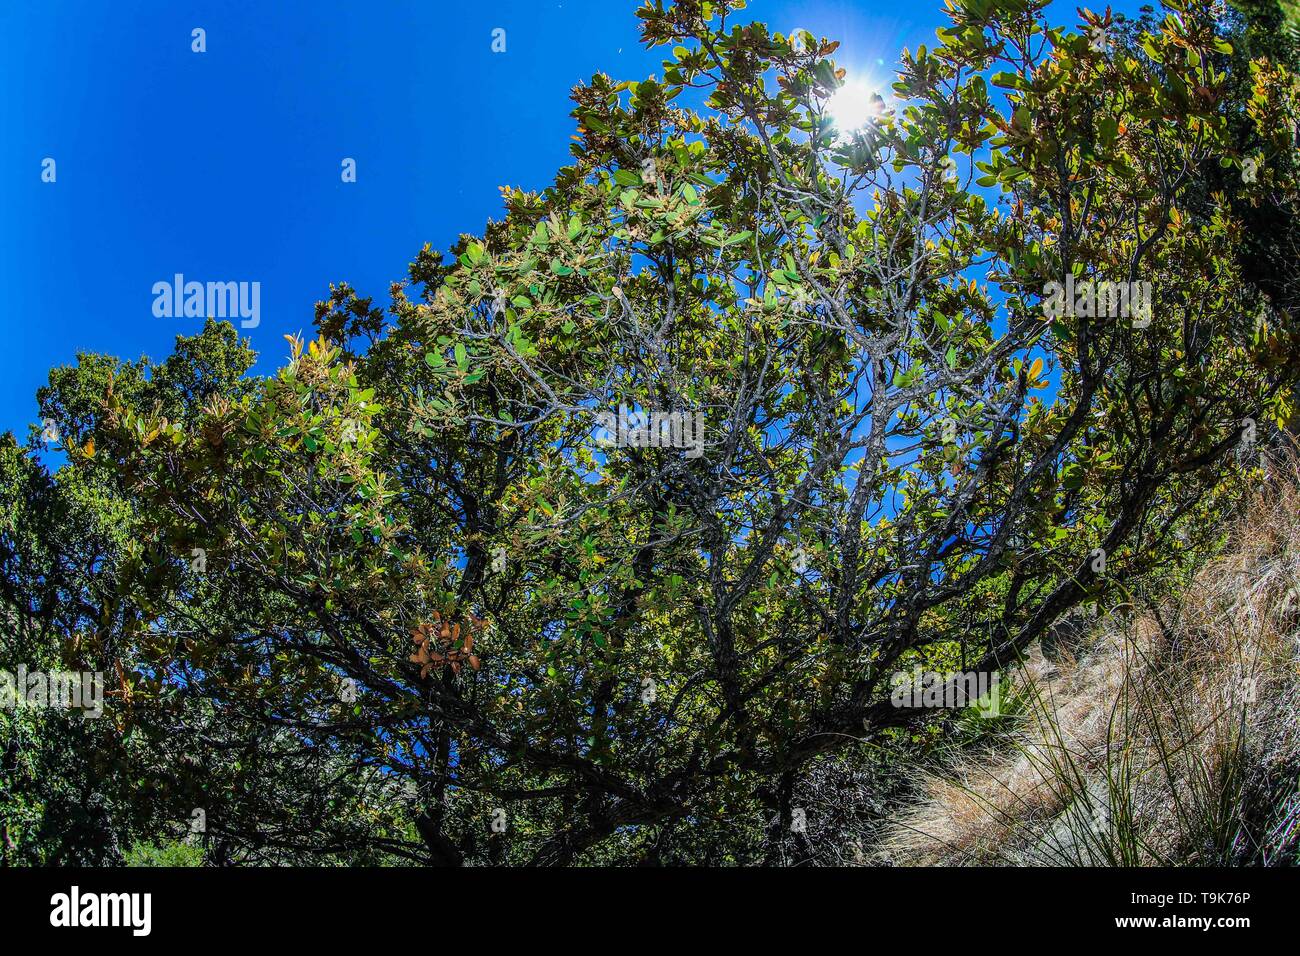 Soil texture, dry branches and ashes in rural area Real del Alamito in  Sonora, Mexico  Photo: (Photo by Luis Gutierrez / Norte Photo)  dry,  dry Stock Photo - Alamy